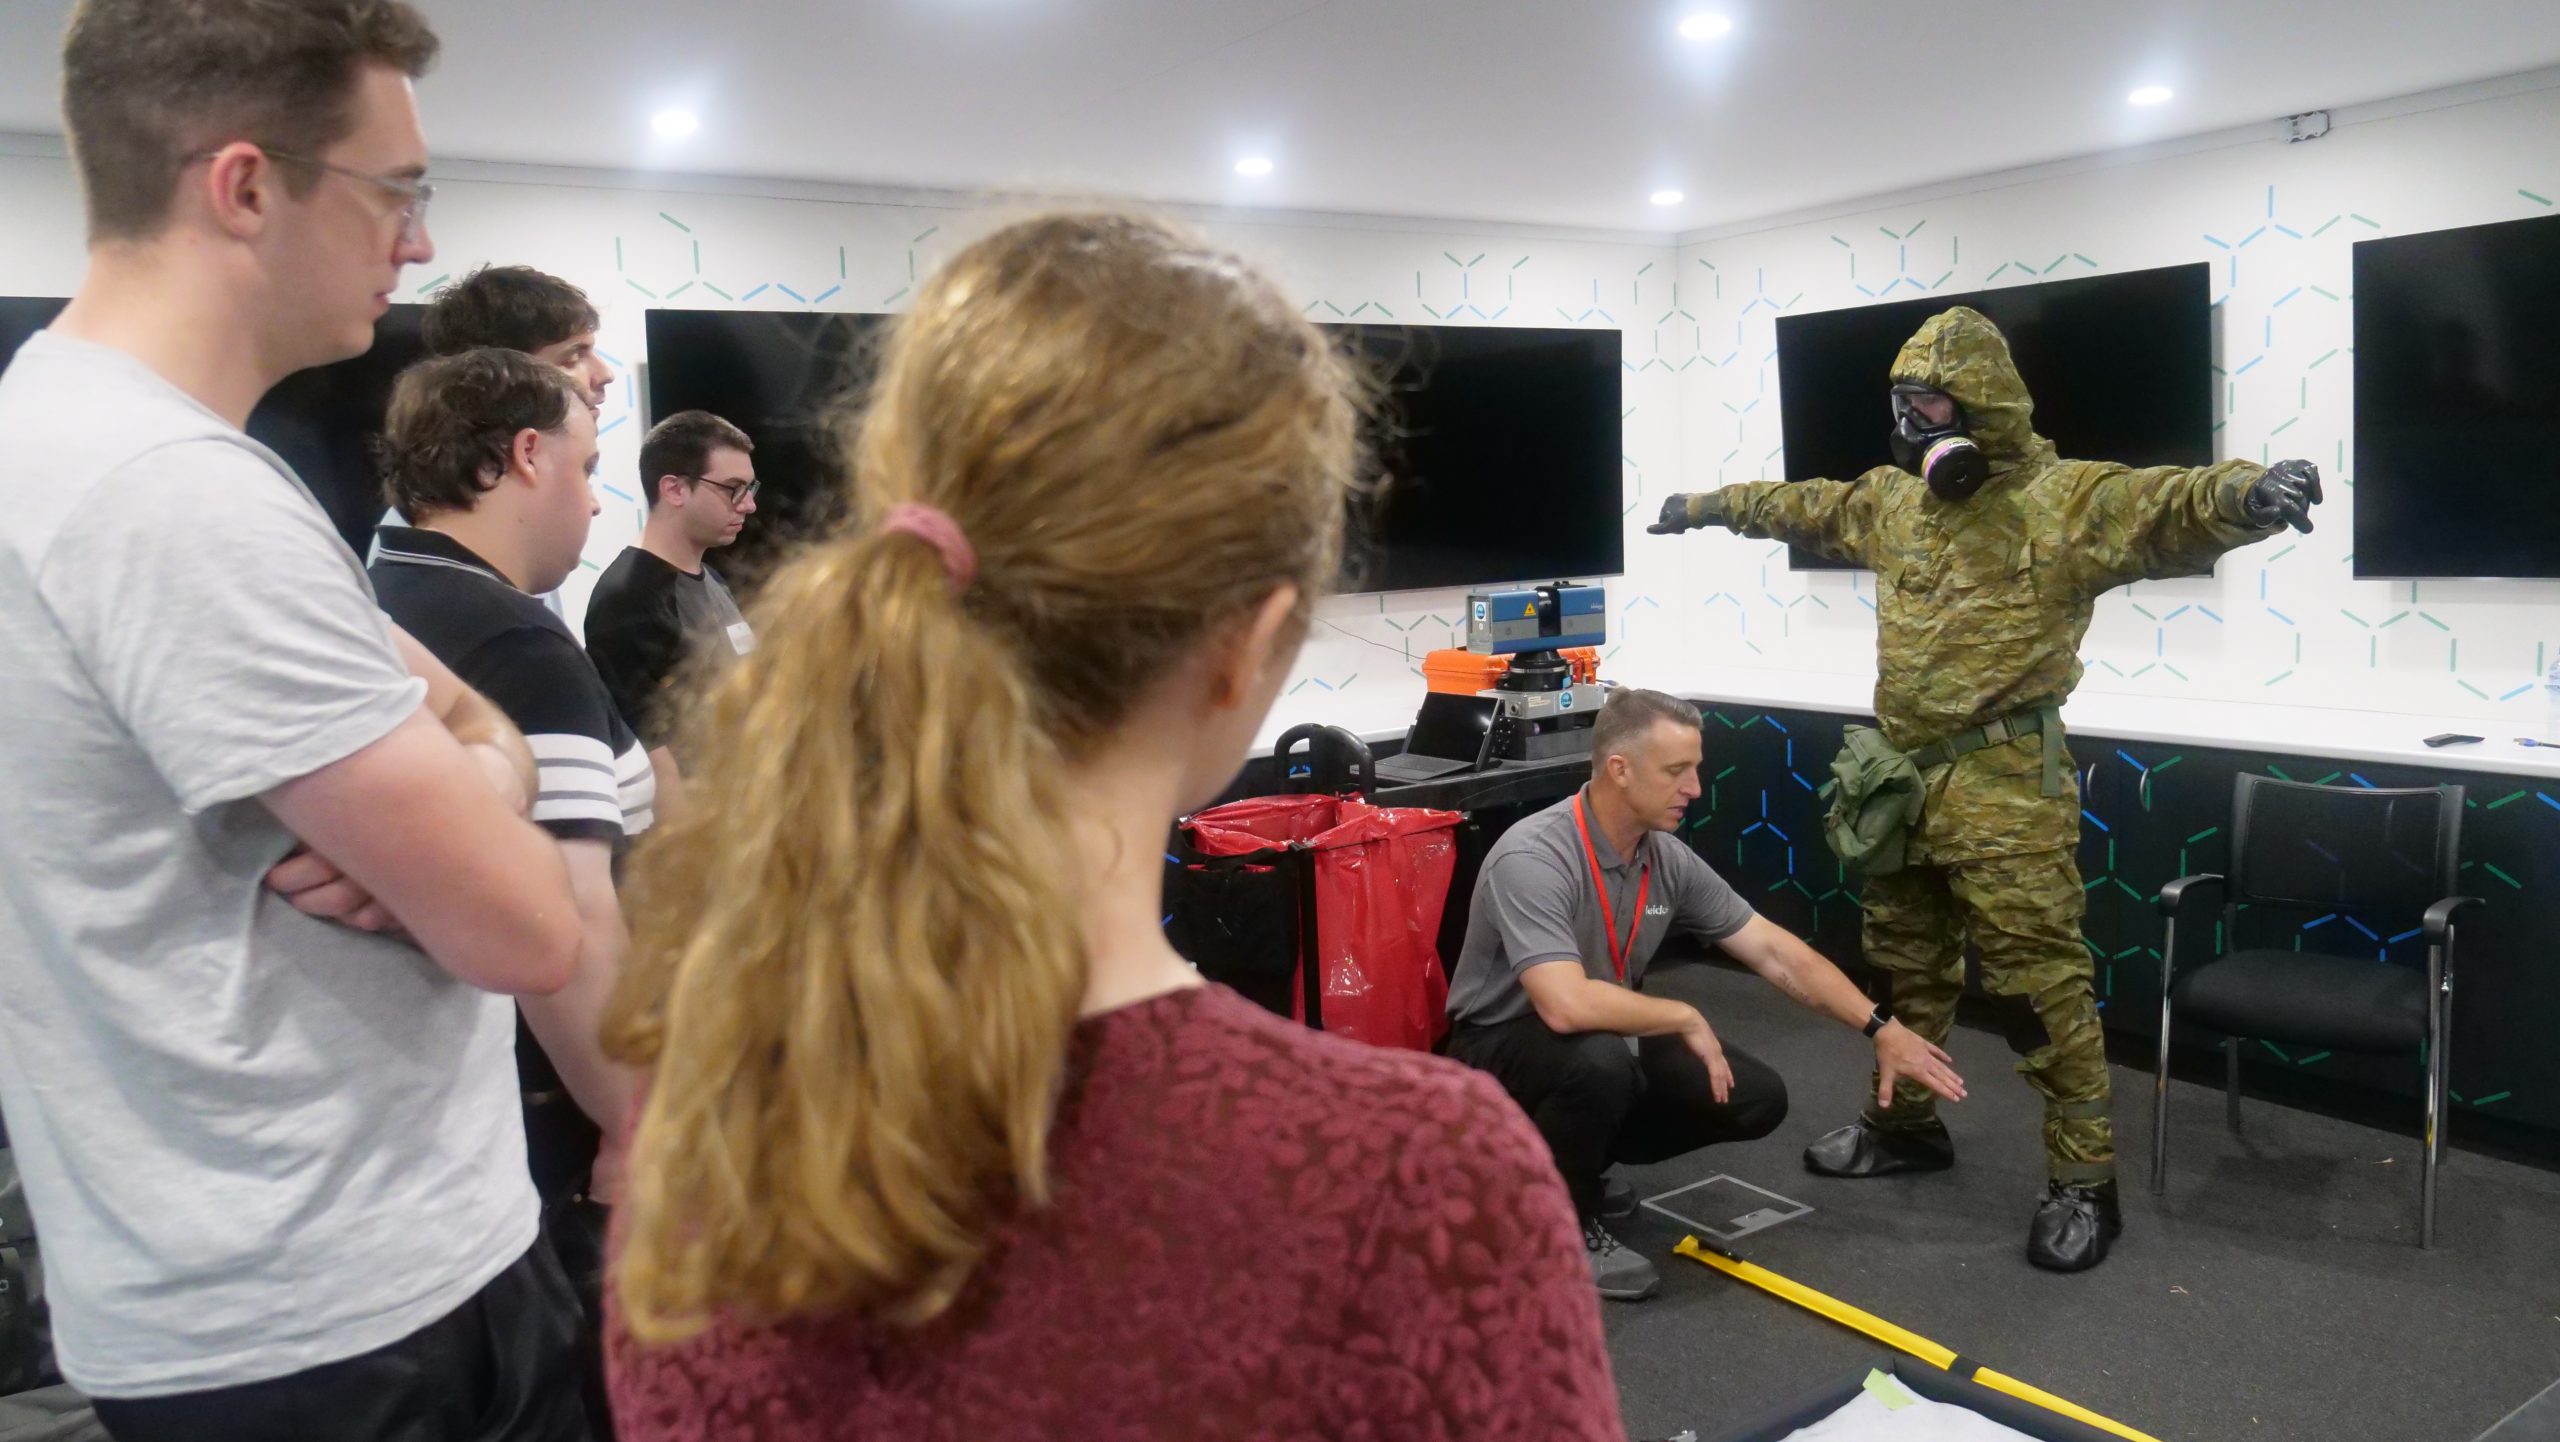 Students learned about CBRN equipment, and had a chance to personally experience the difficult nature of working in full-body CBRN protective gear.